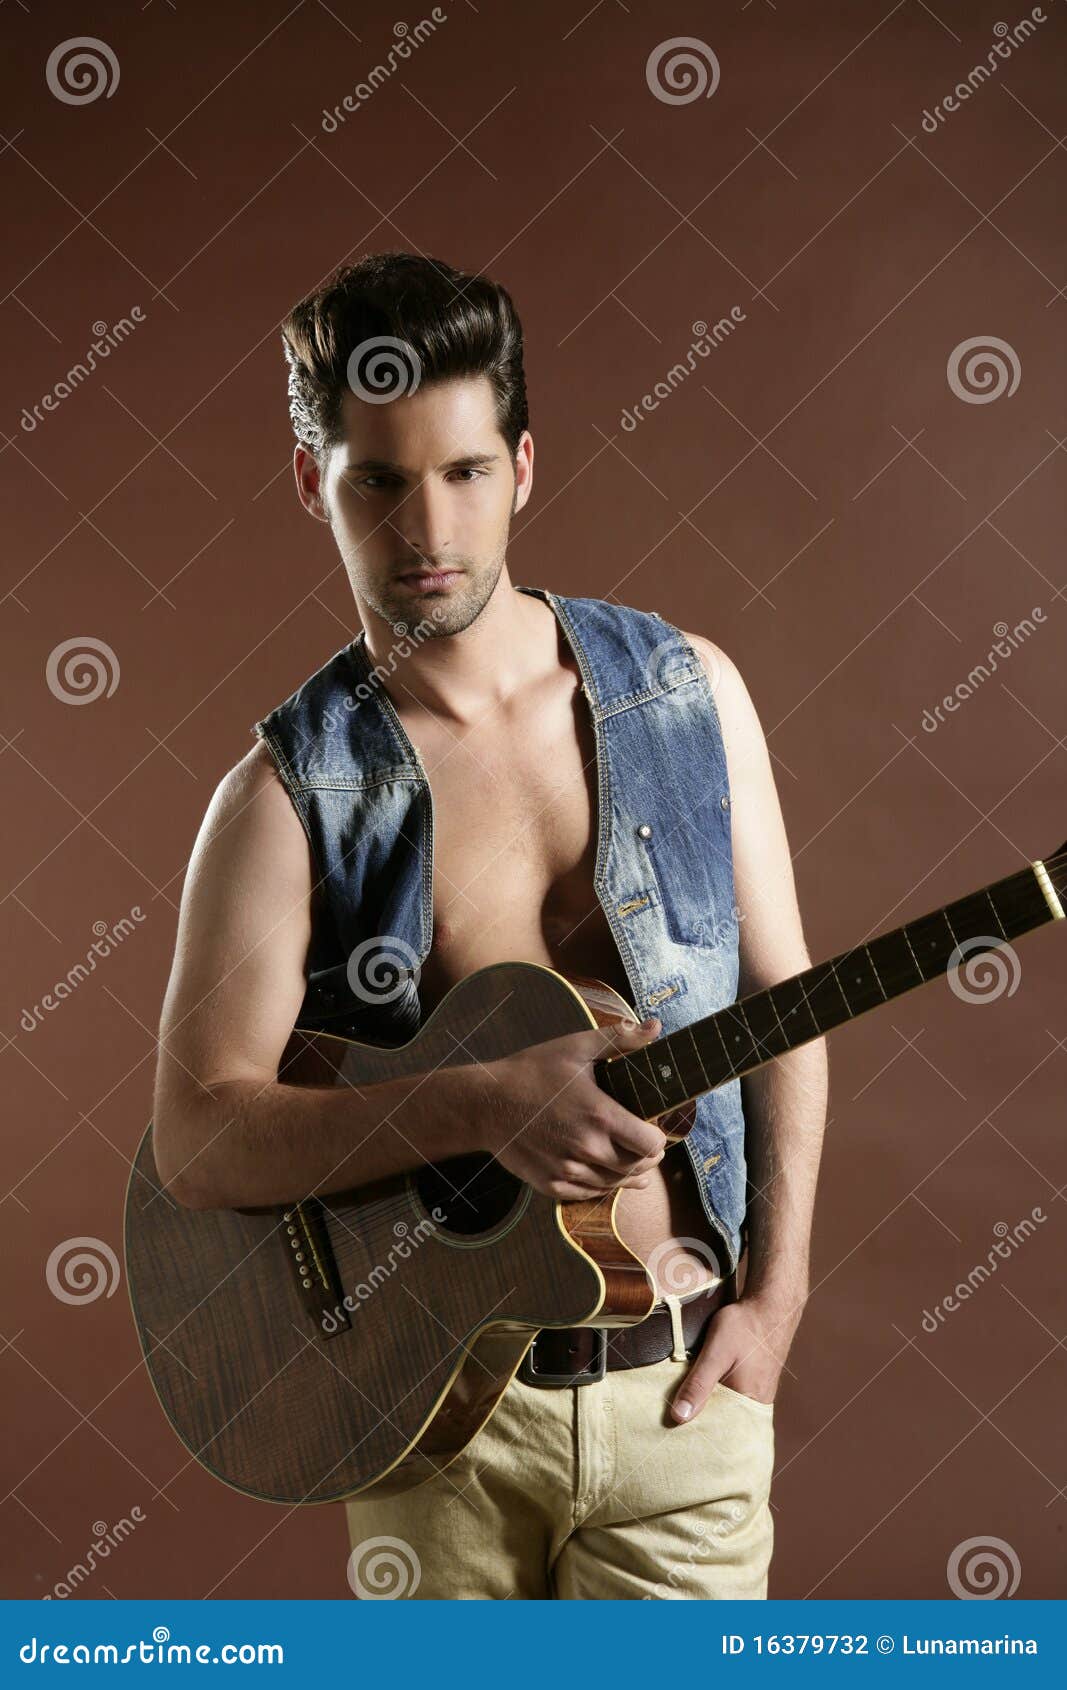 Young Man Musician Guitar Player On Brown Stock Photo 